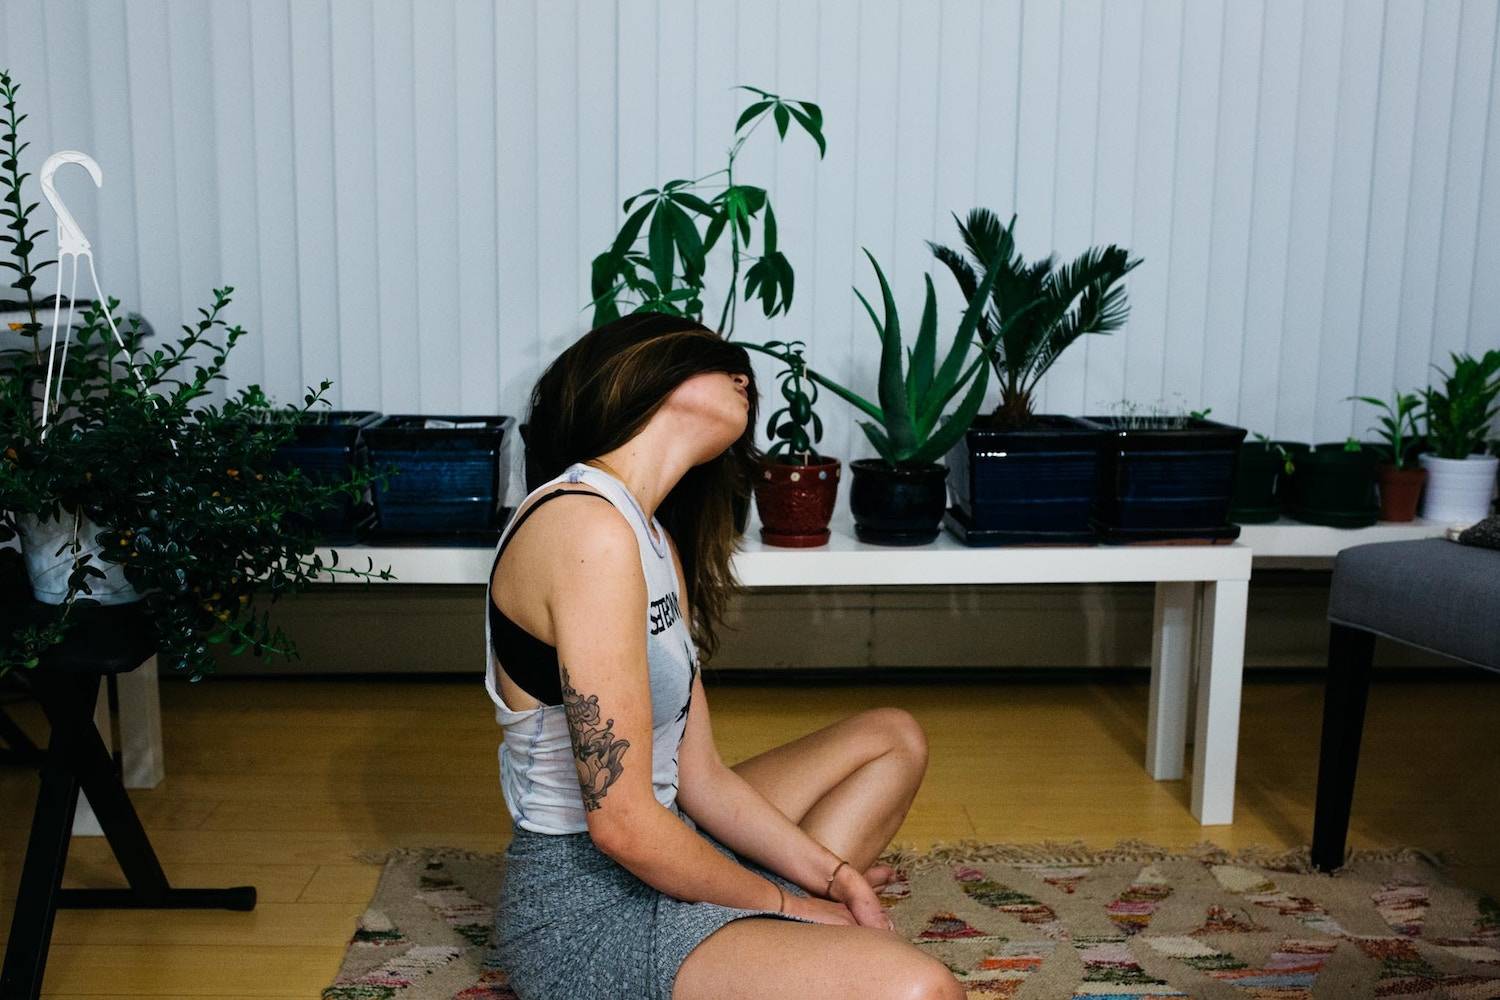 A brunette woman stretches in her living room, which is full of plants.